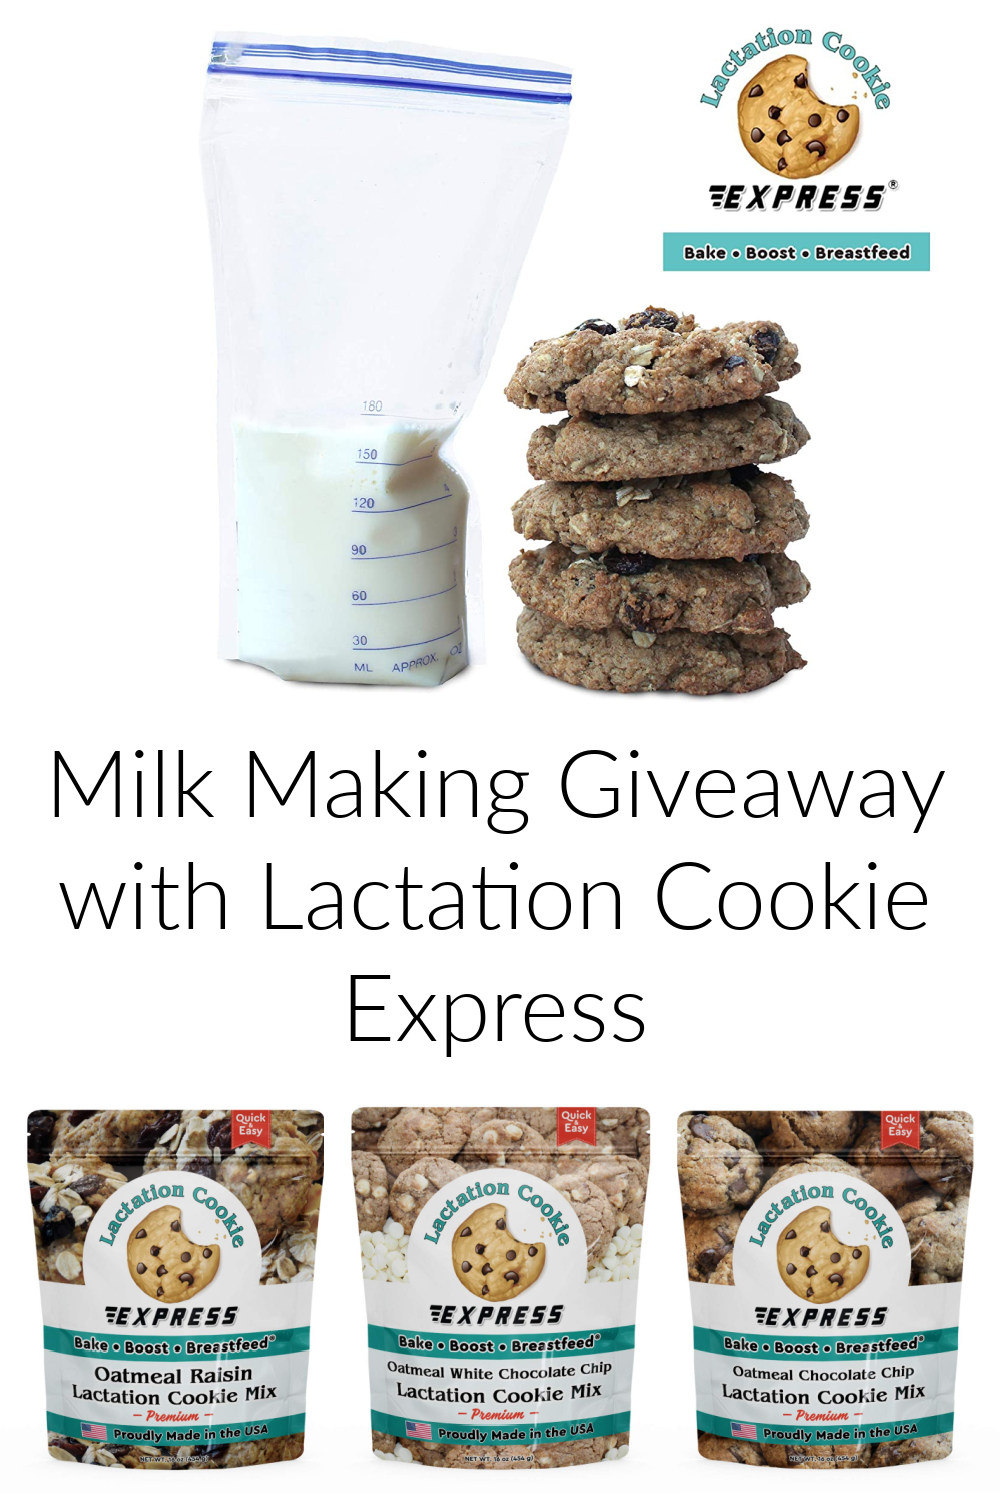 Lactation Cookie Express Giveaway